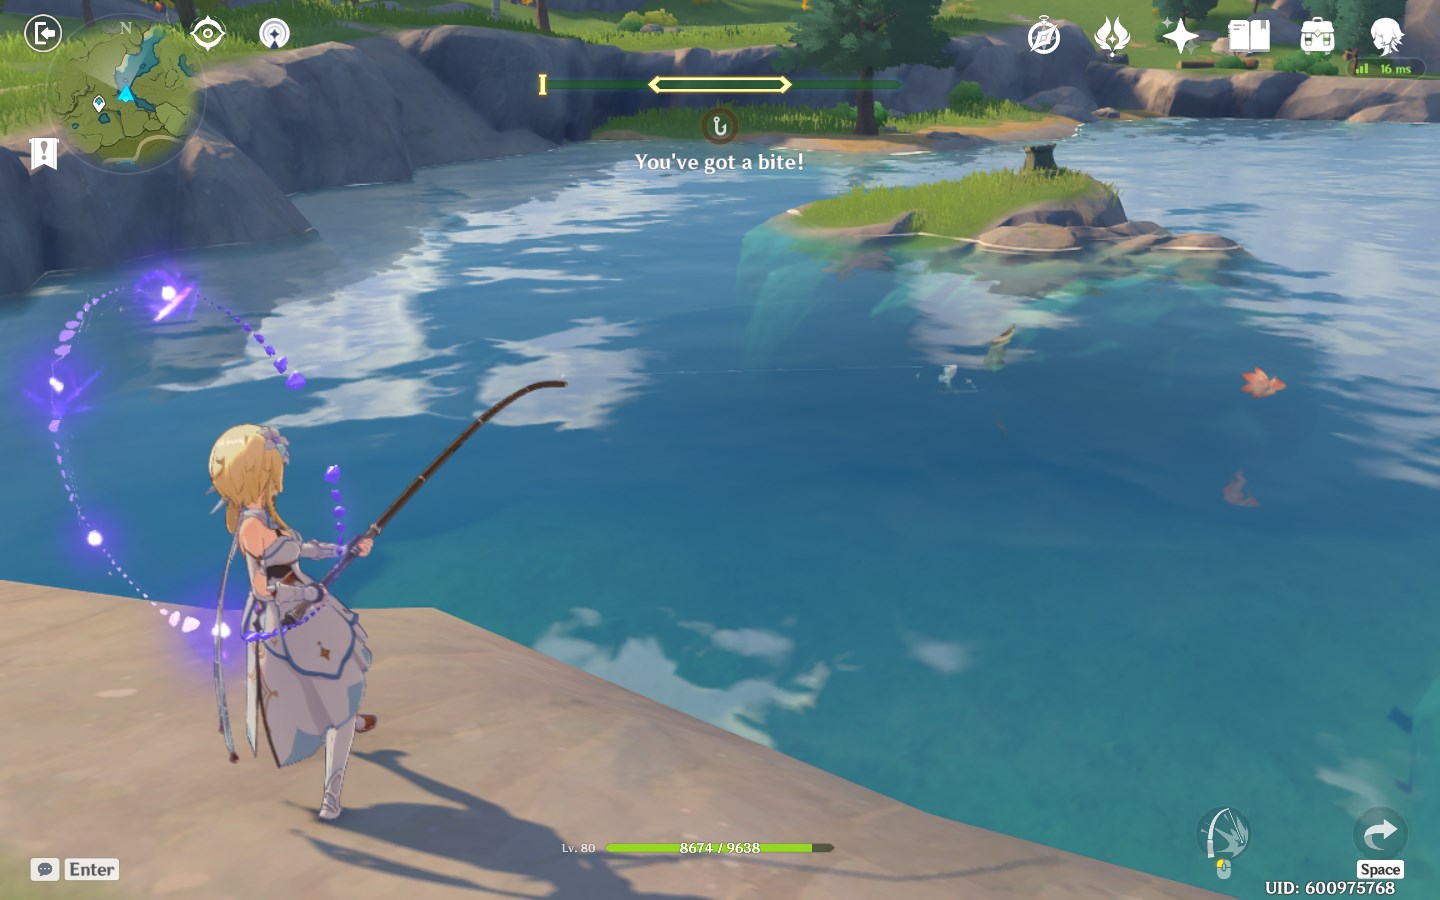 The female traveler from Genshin Impact fishes in a nearby river